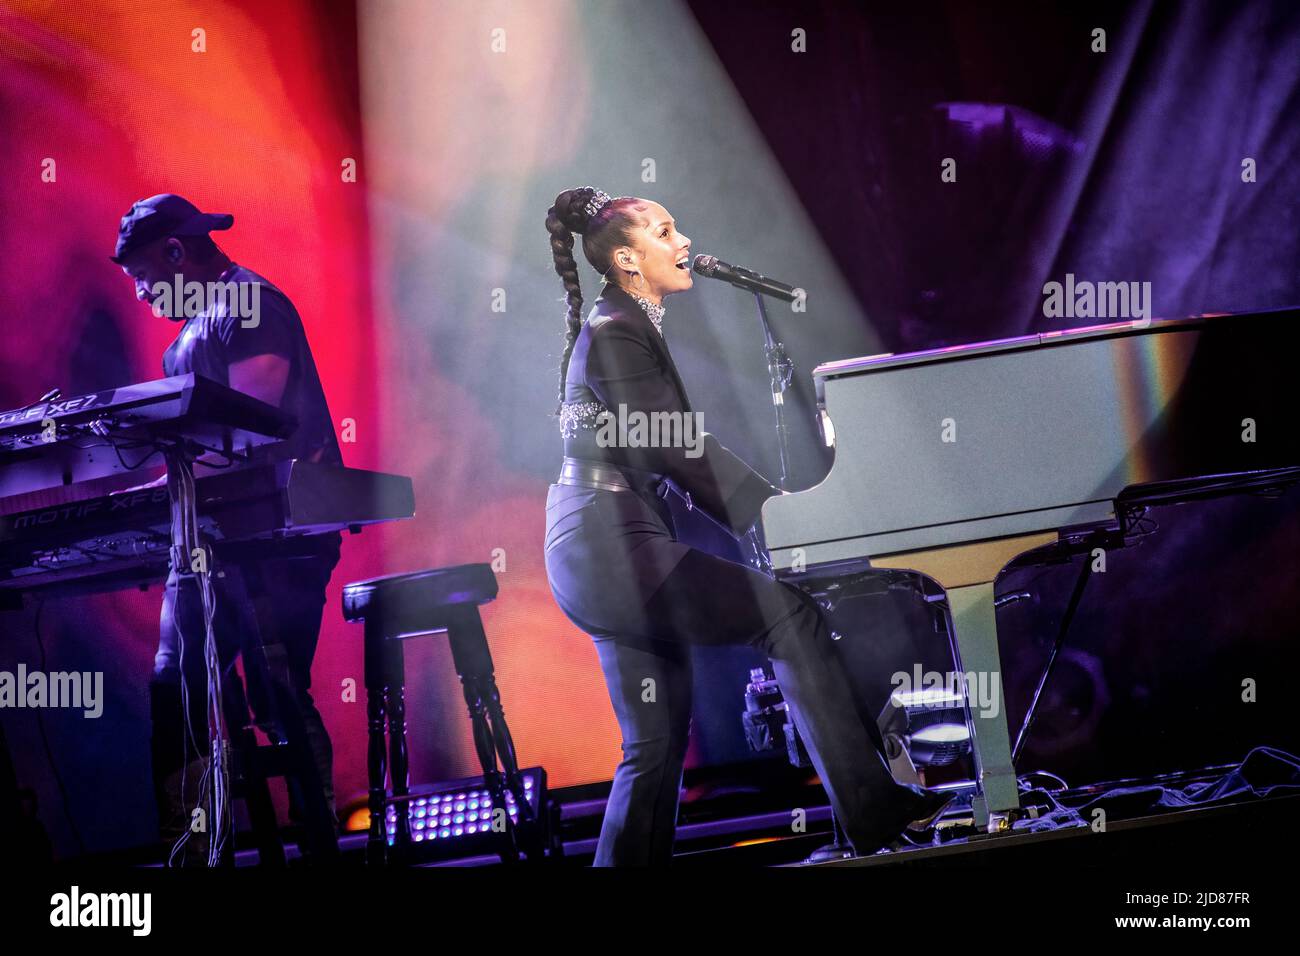 Oslo, Norway. 27th, June 2022. The American R&B singer, songwriter and musician Alicia Keys performs a live concert at Oslo Spektrum in Oslo. (Photo credit: Gonzales Photo - Terje Dokken). Stock Photo